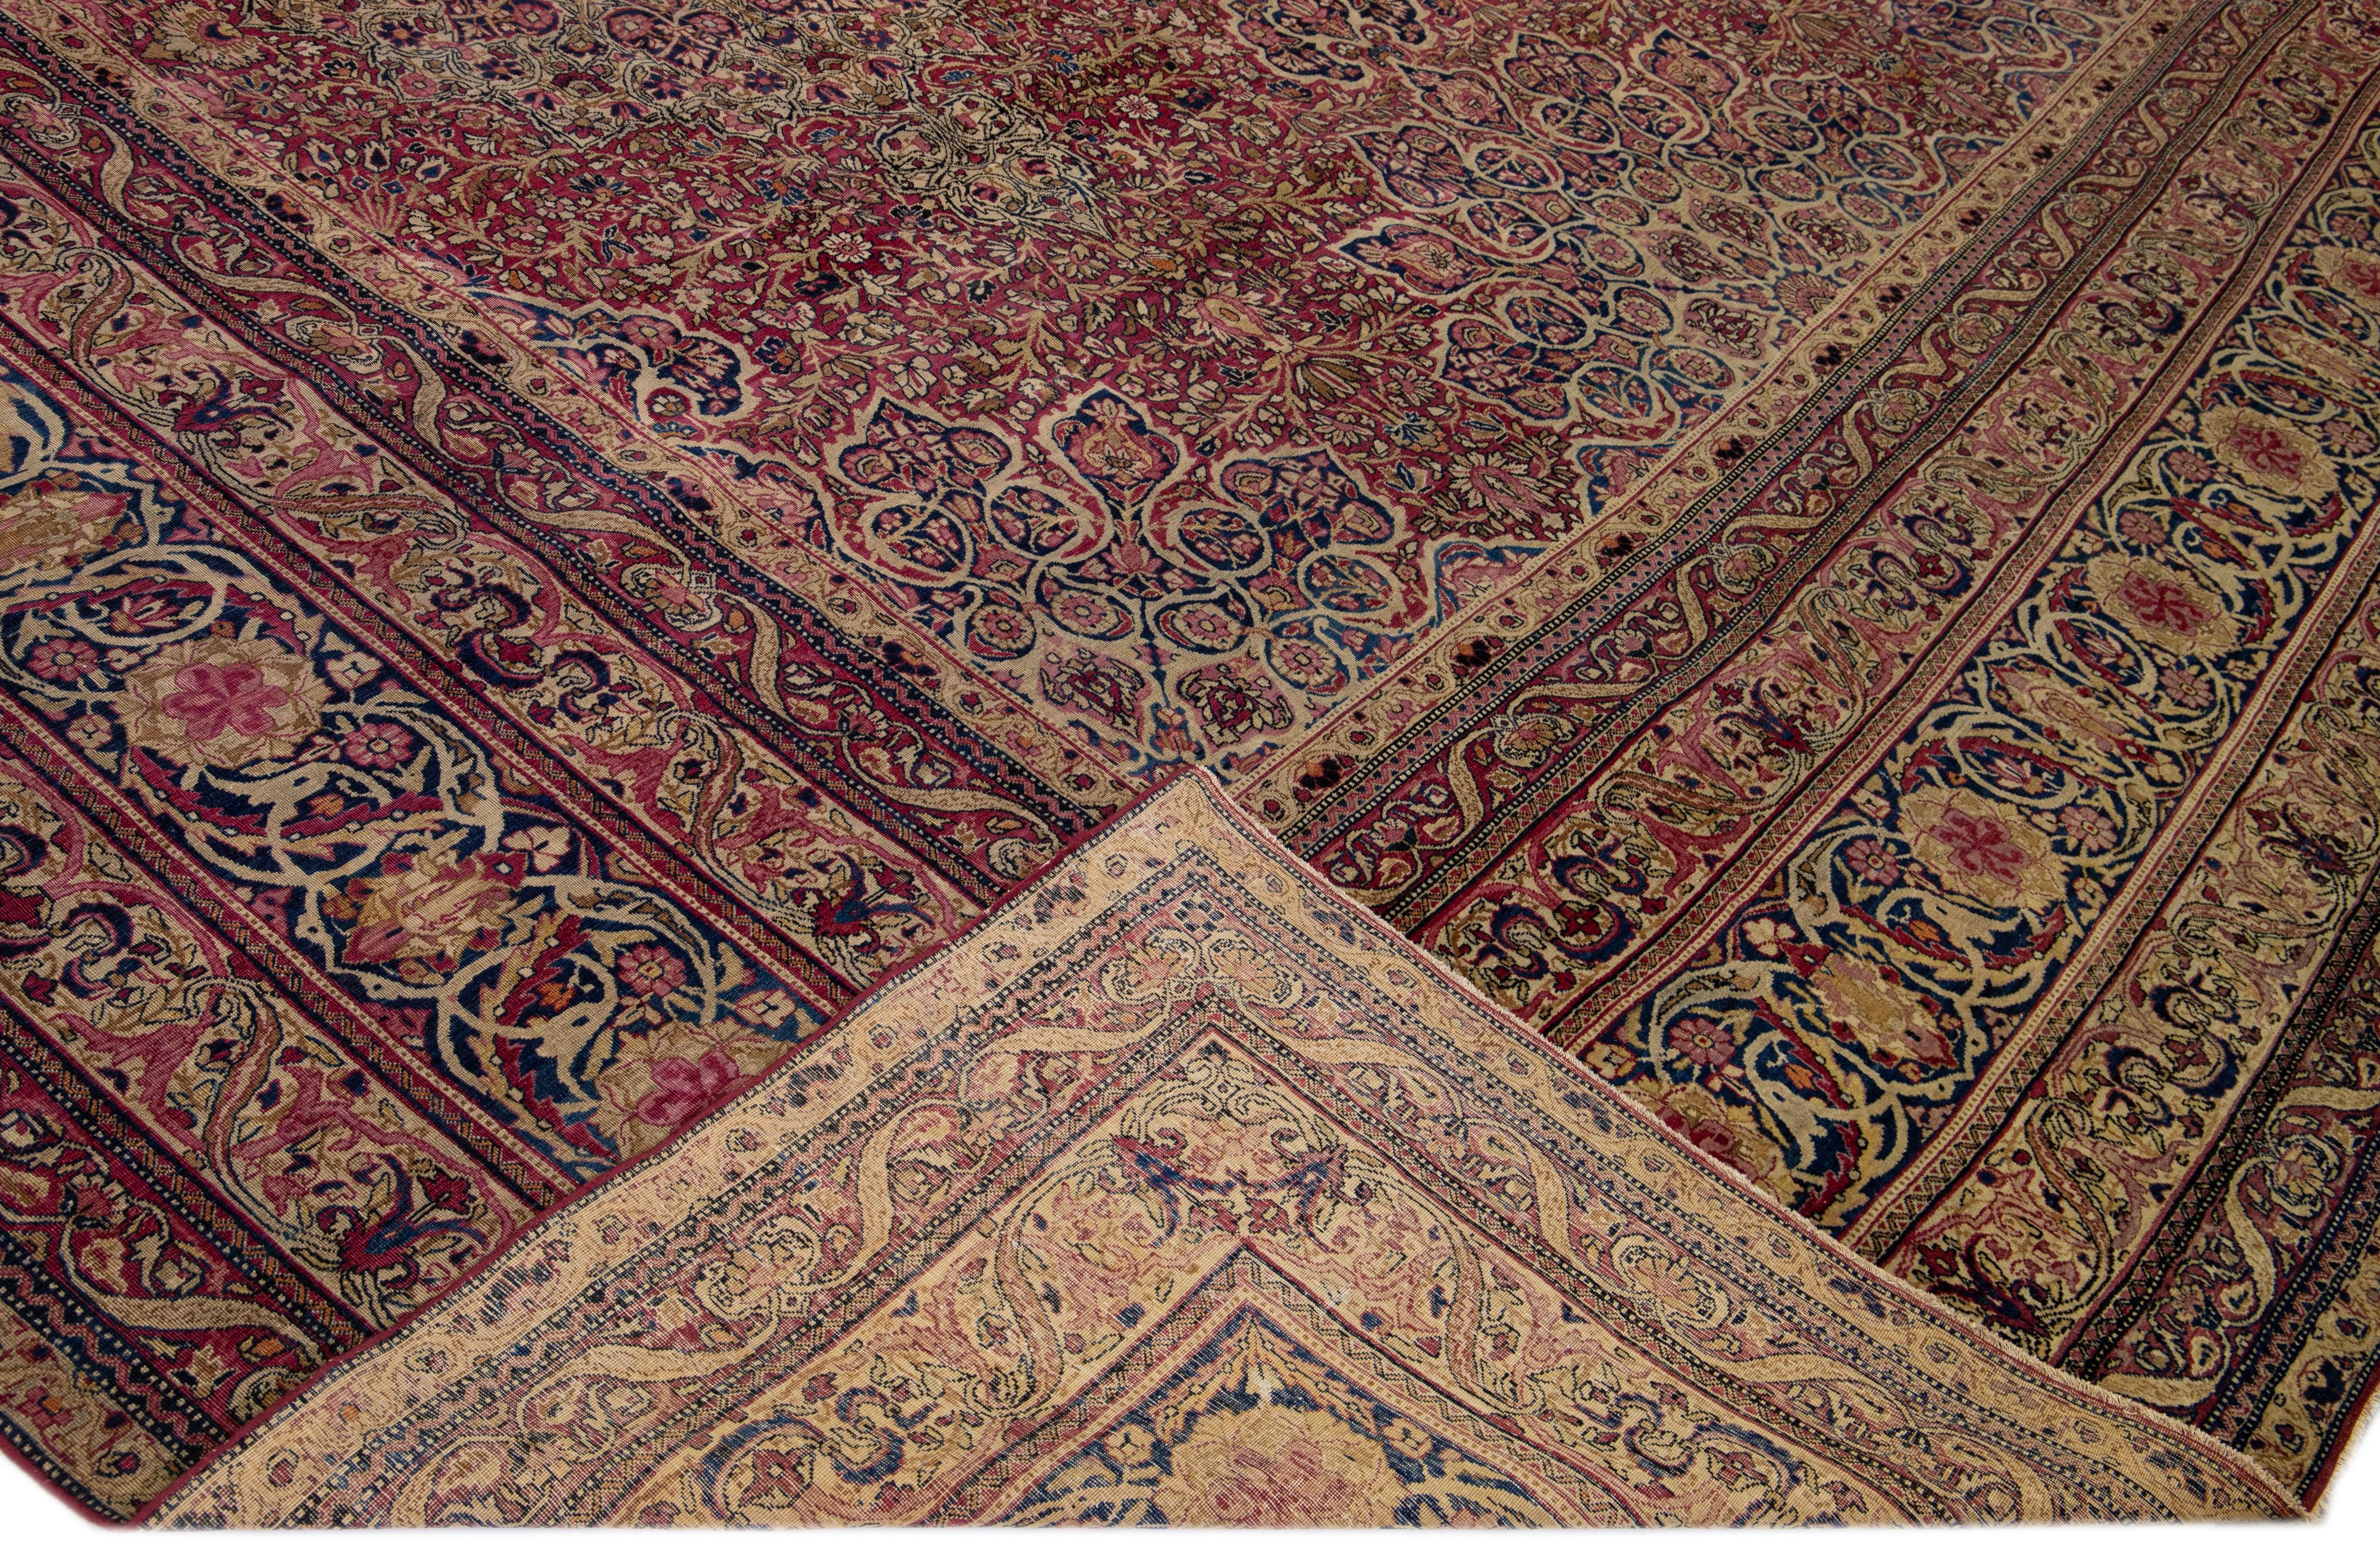 Beautiful antique Kerman hand-knotted wool rug with a red field. This Persian rug has multicolor accents in a gorgeous all-over rosette pattern design.

This rug measures: 14' x 23'5